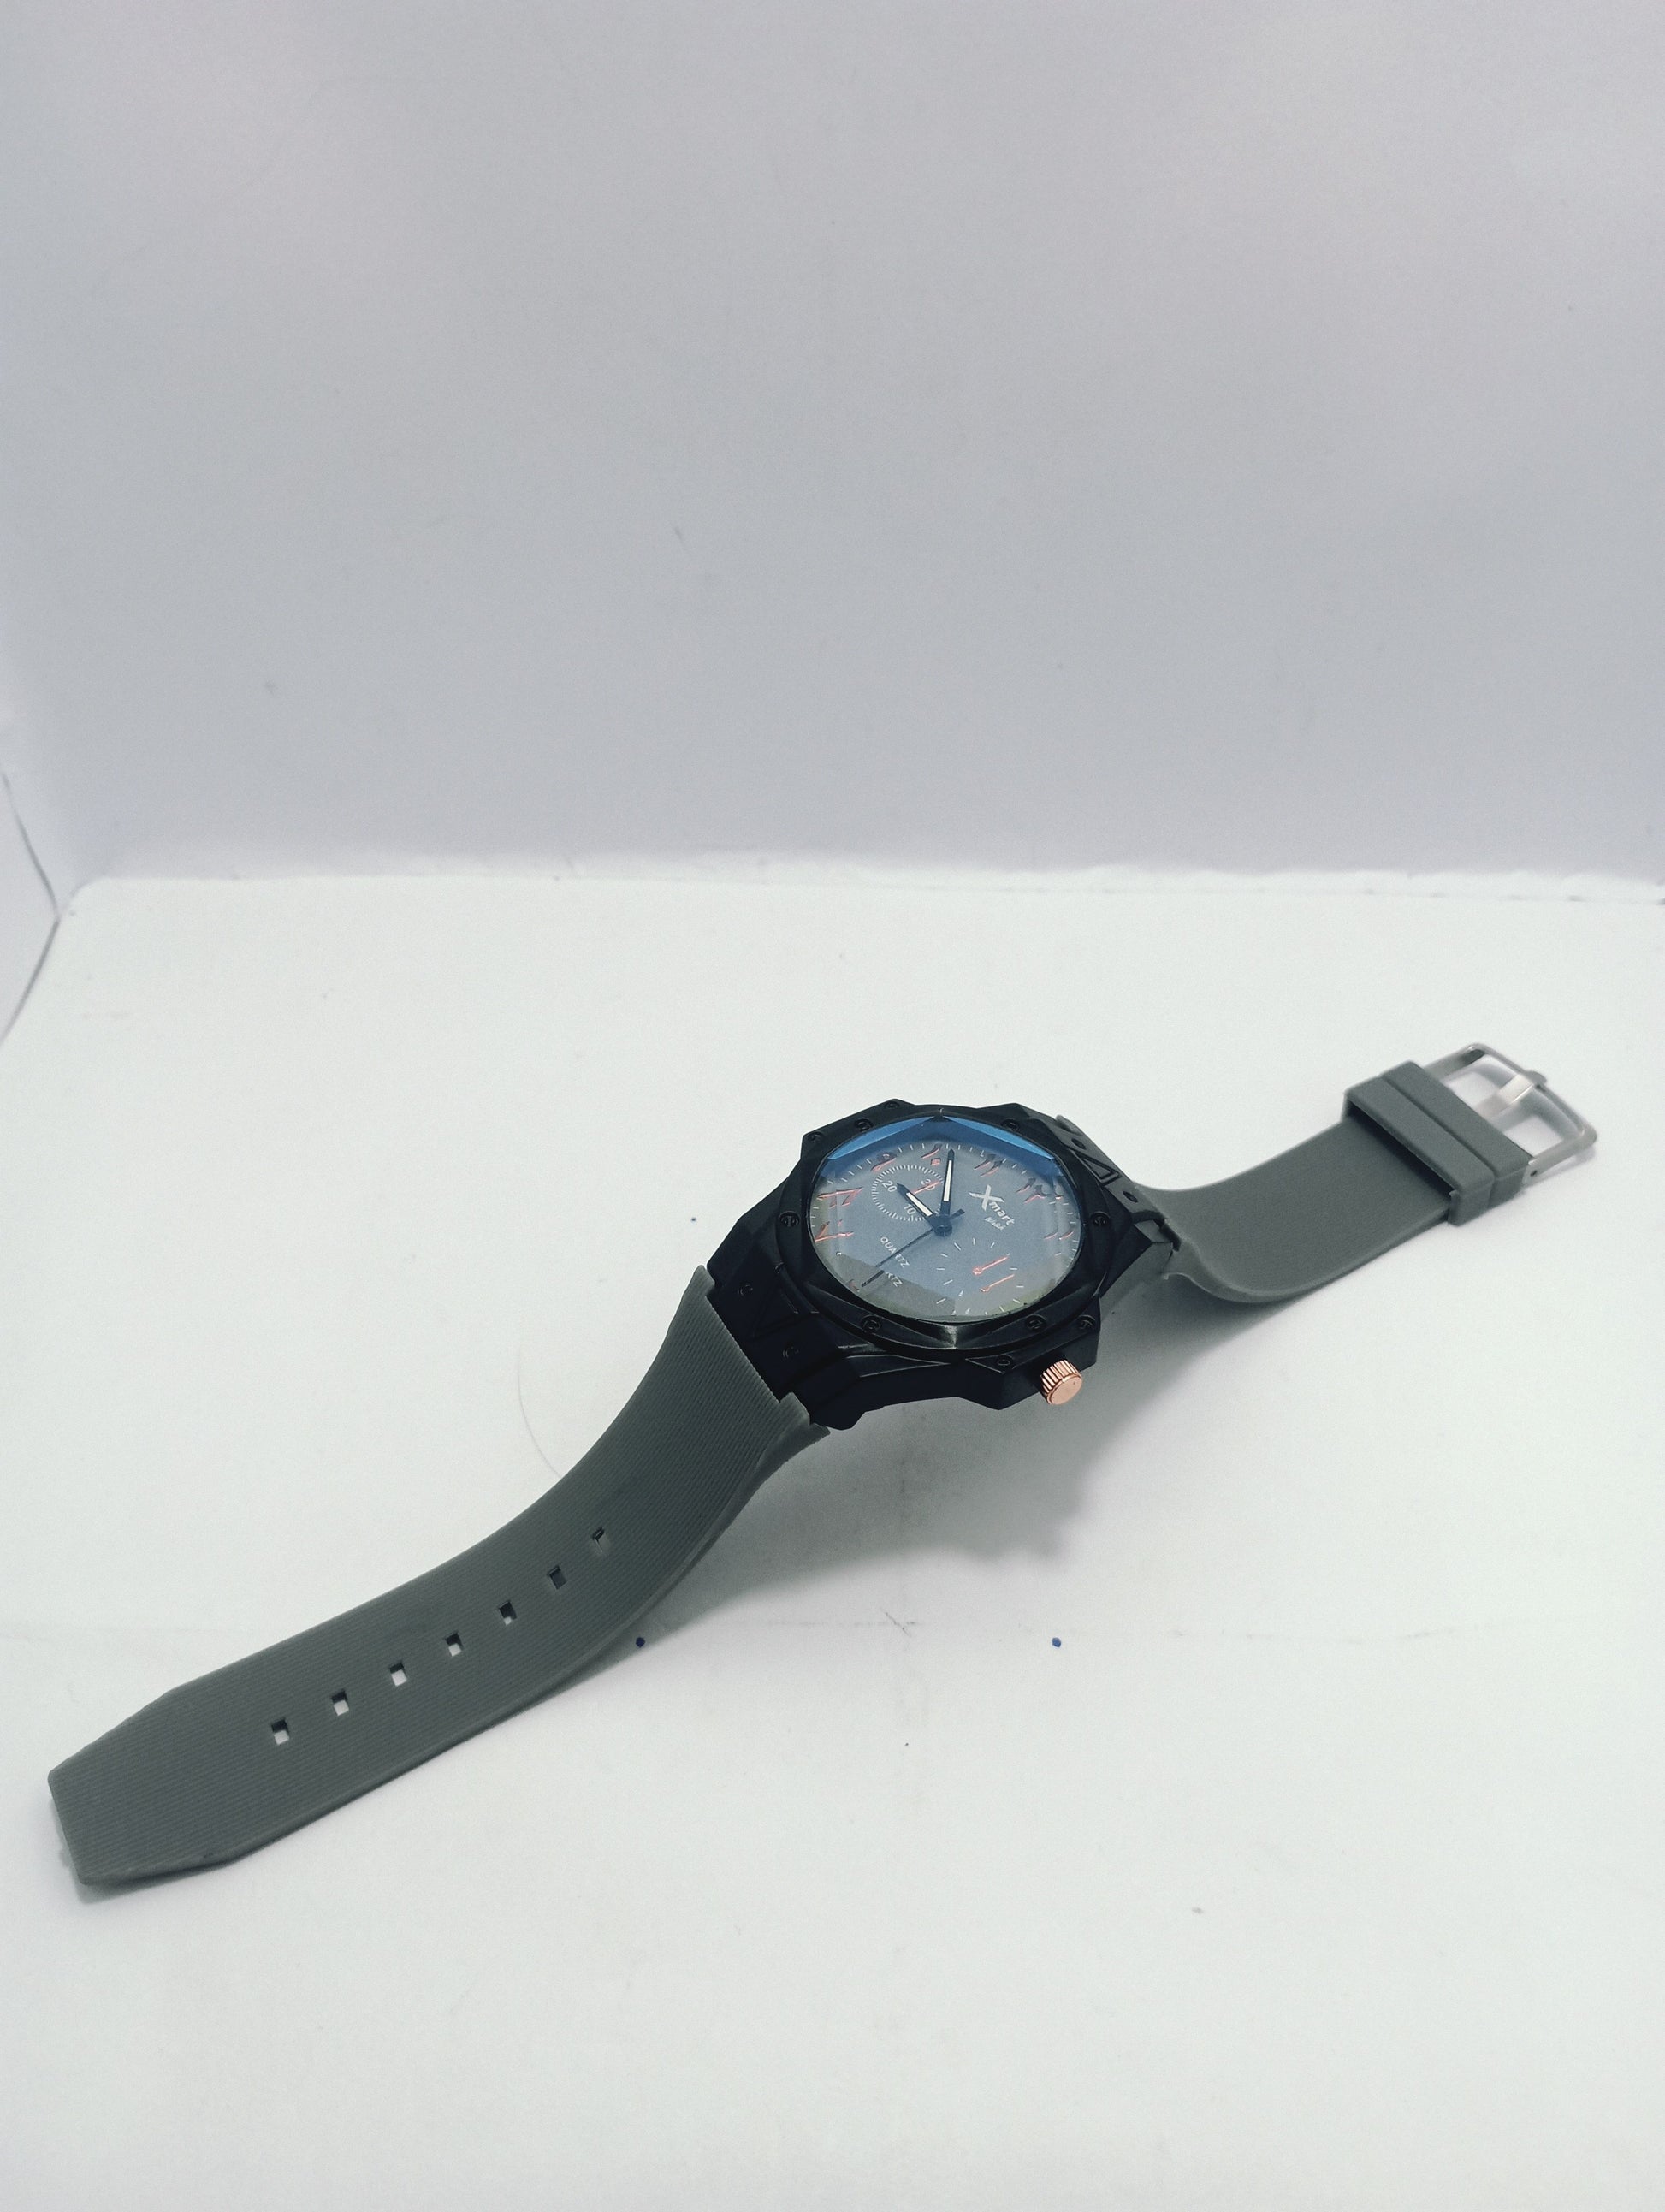 silicon strap watch with white background